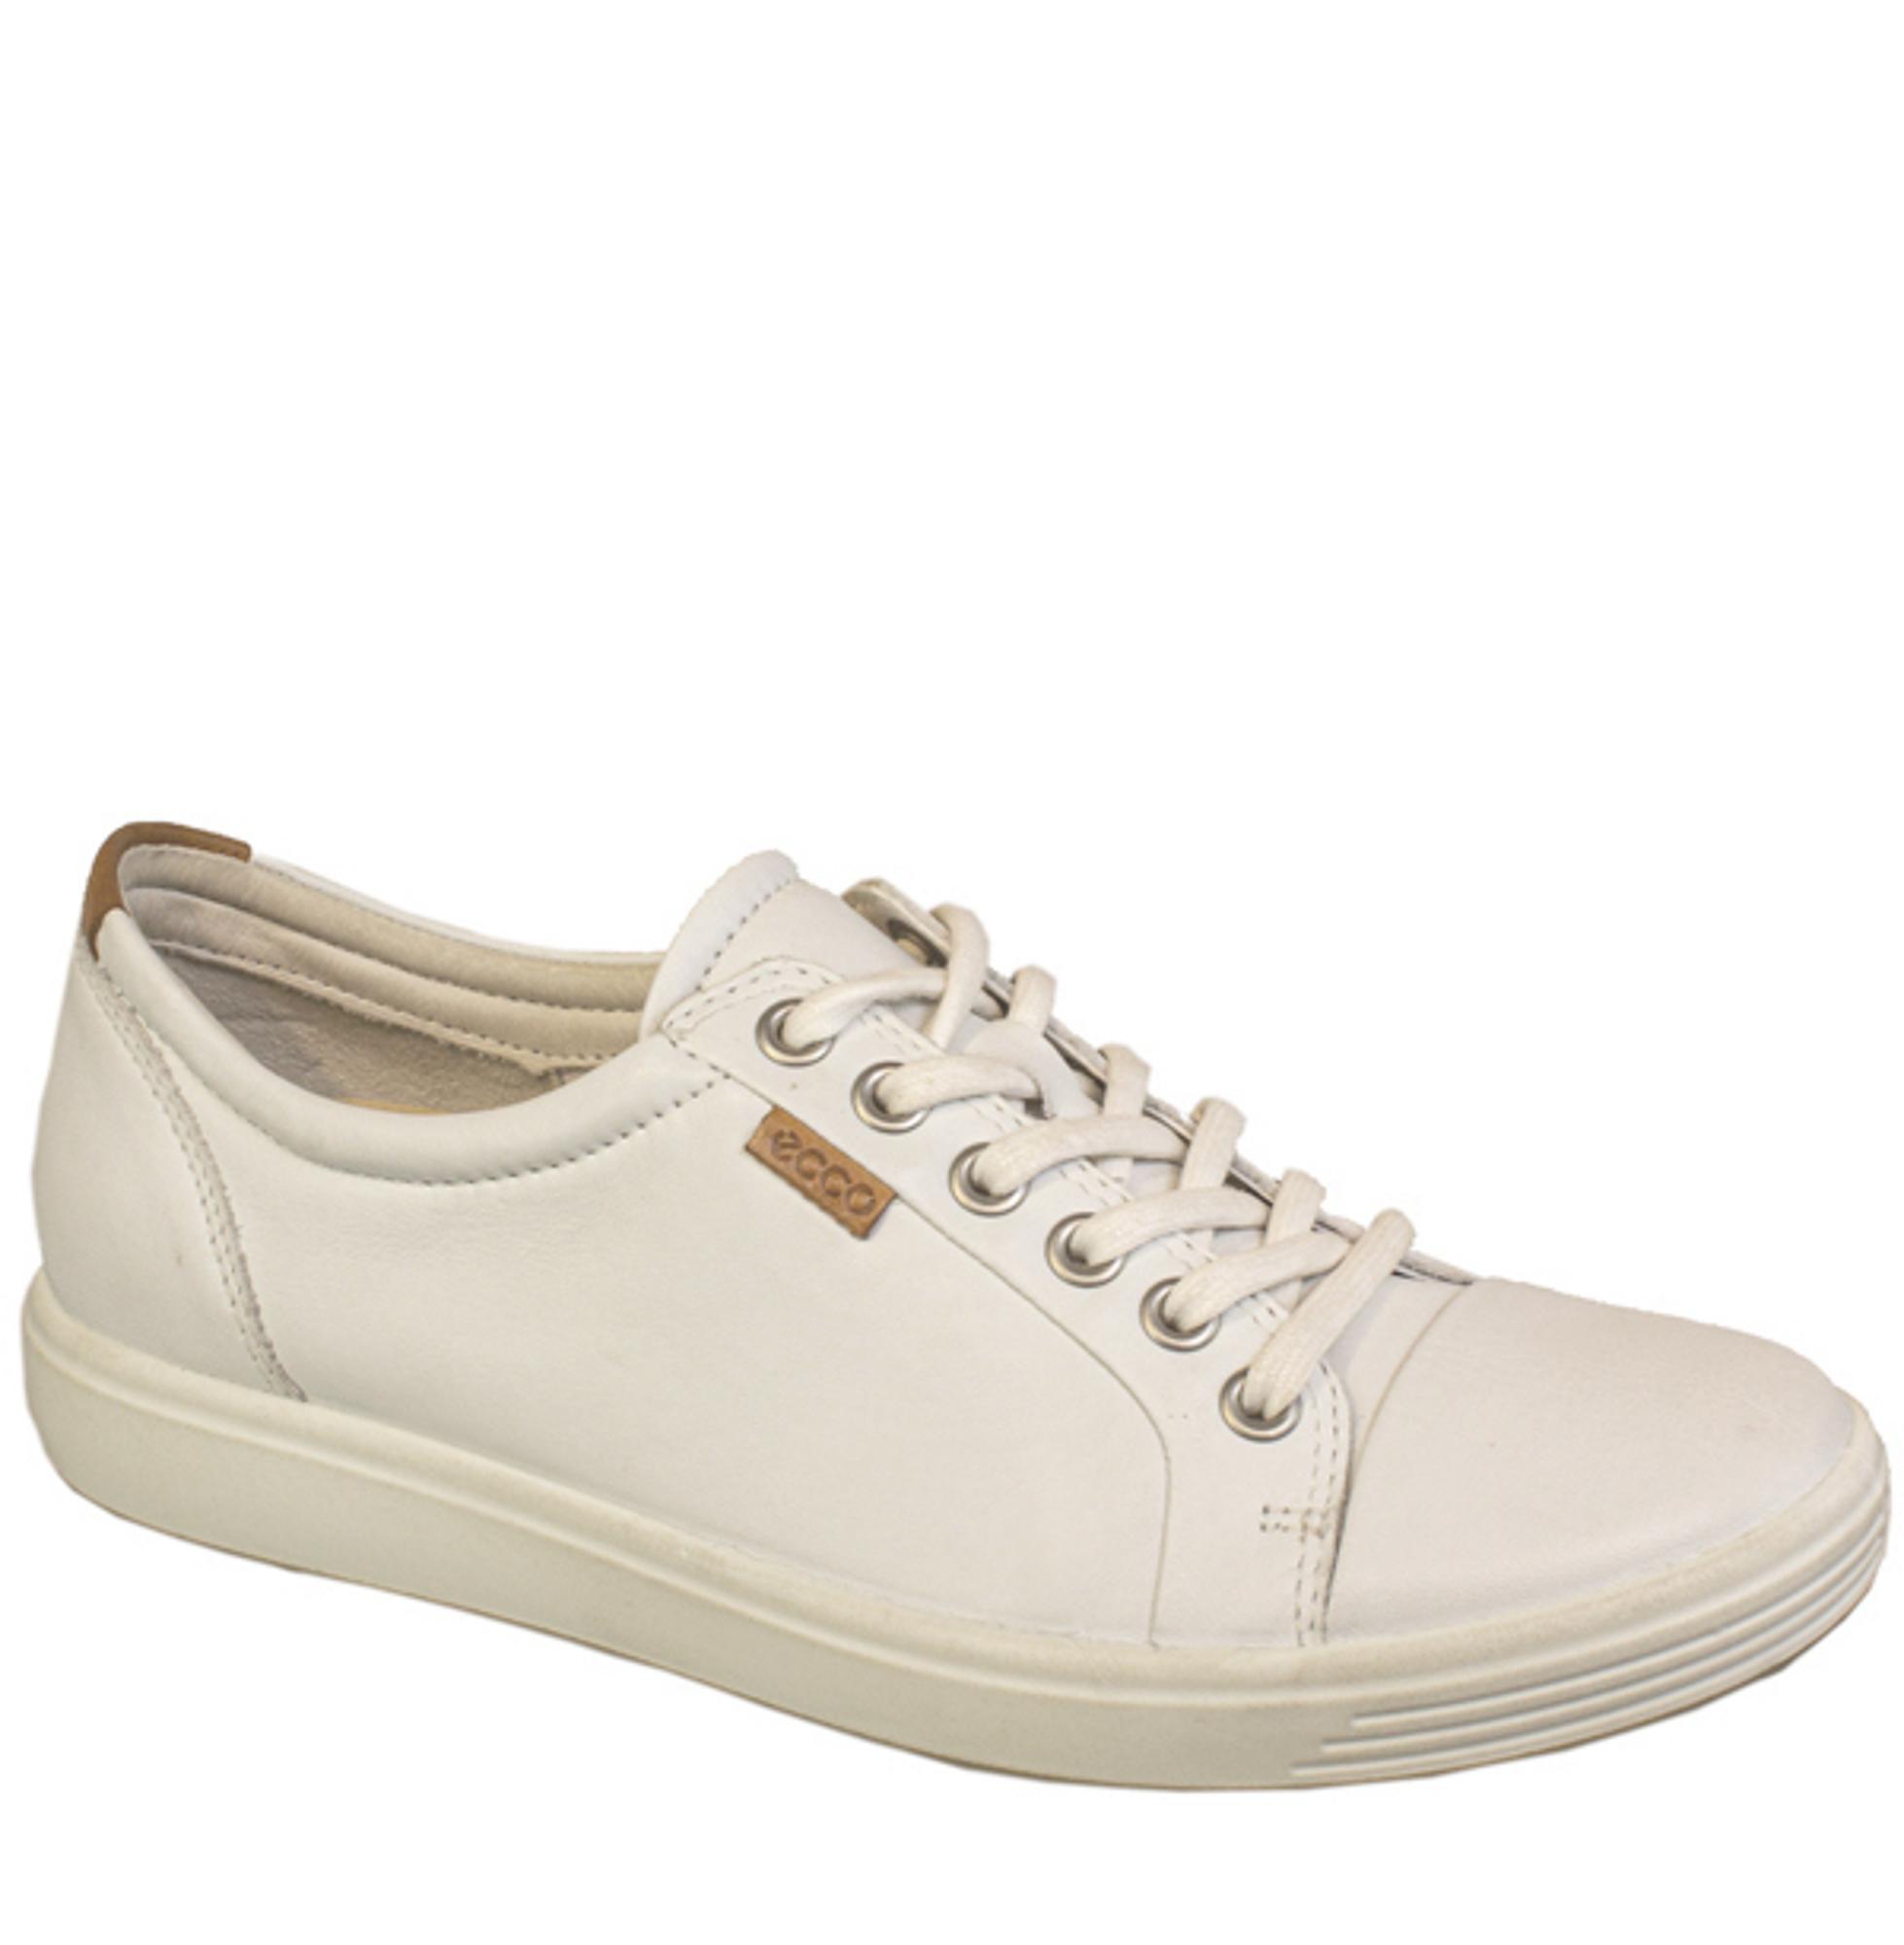 Womens SOFT 7 sneaker / White leather 